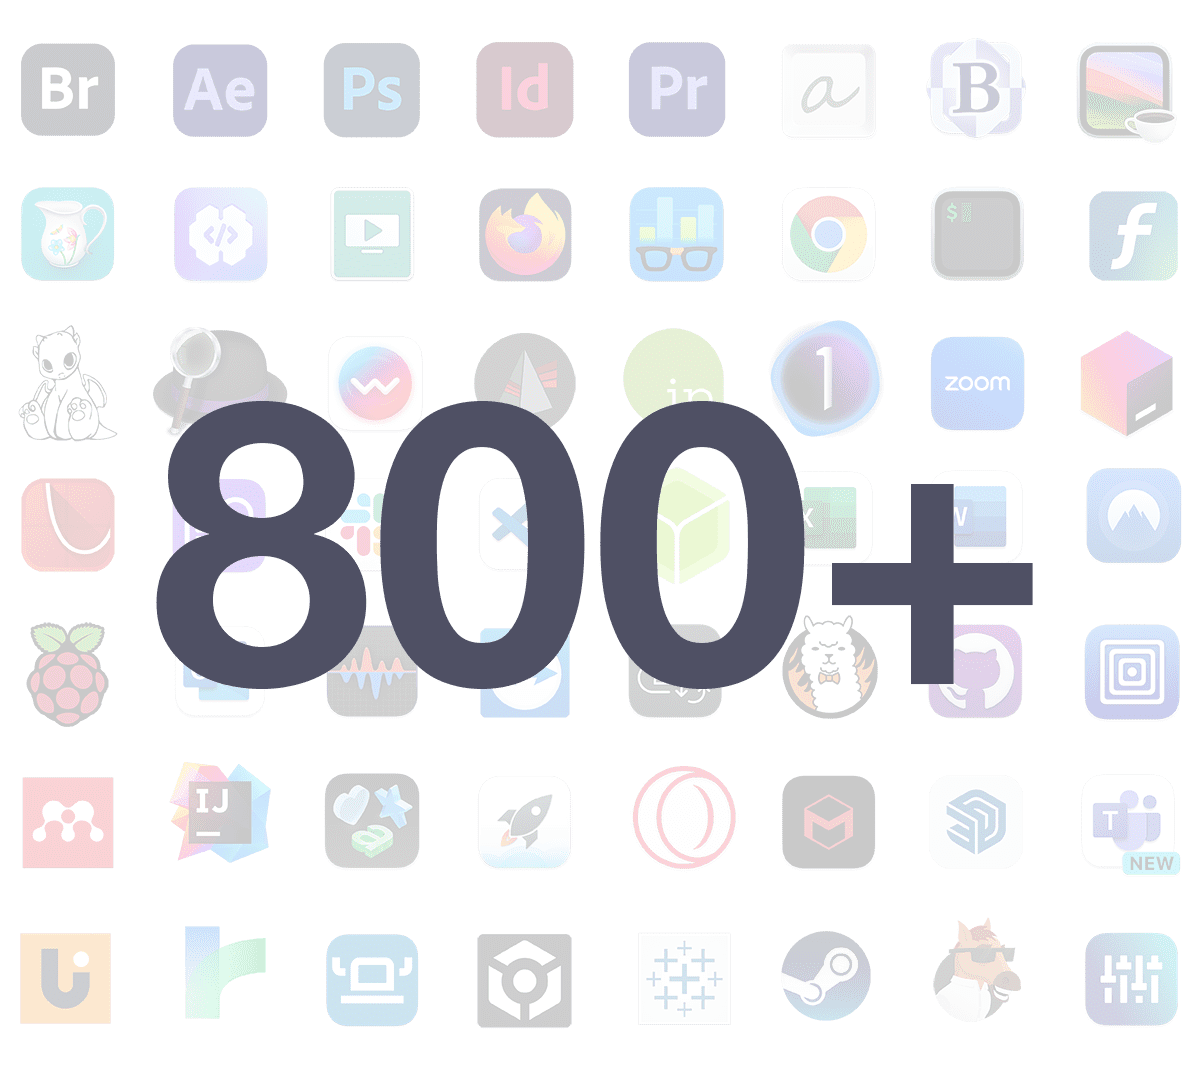 750+ applications in our library